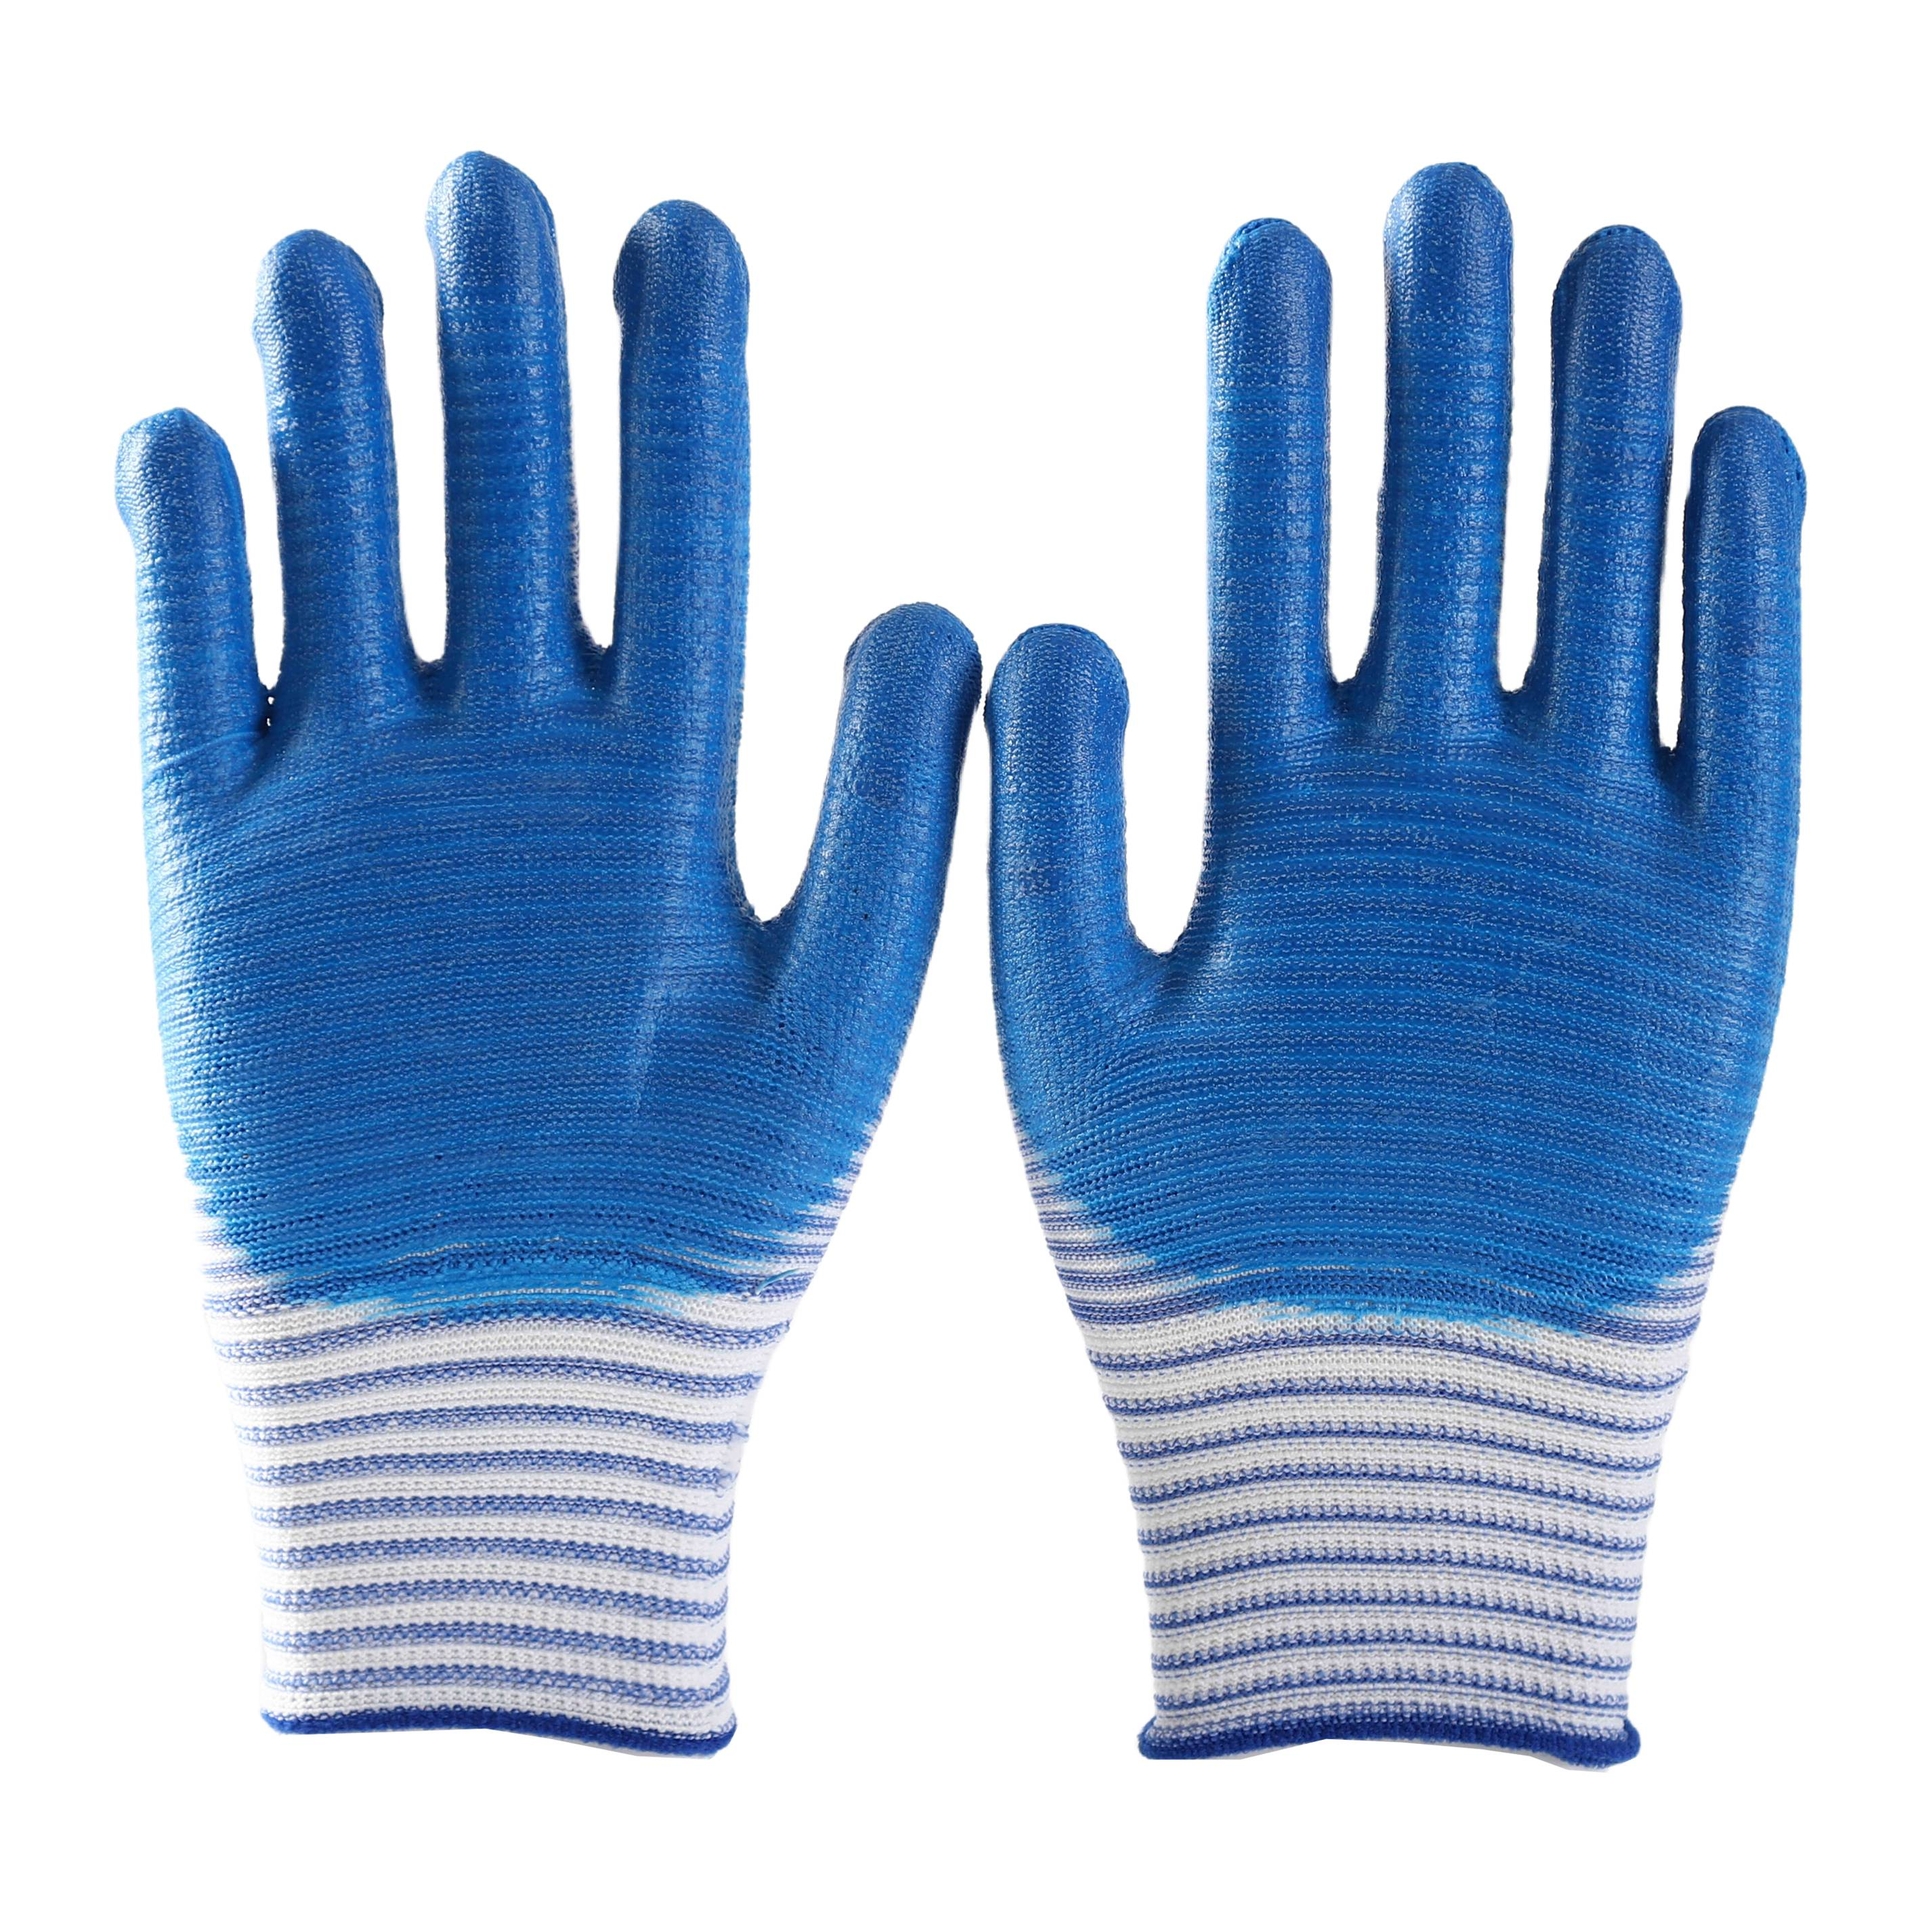                 Pattern polyester with blue nitrile coating gloves            